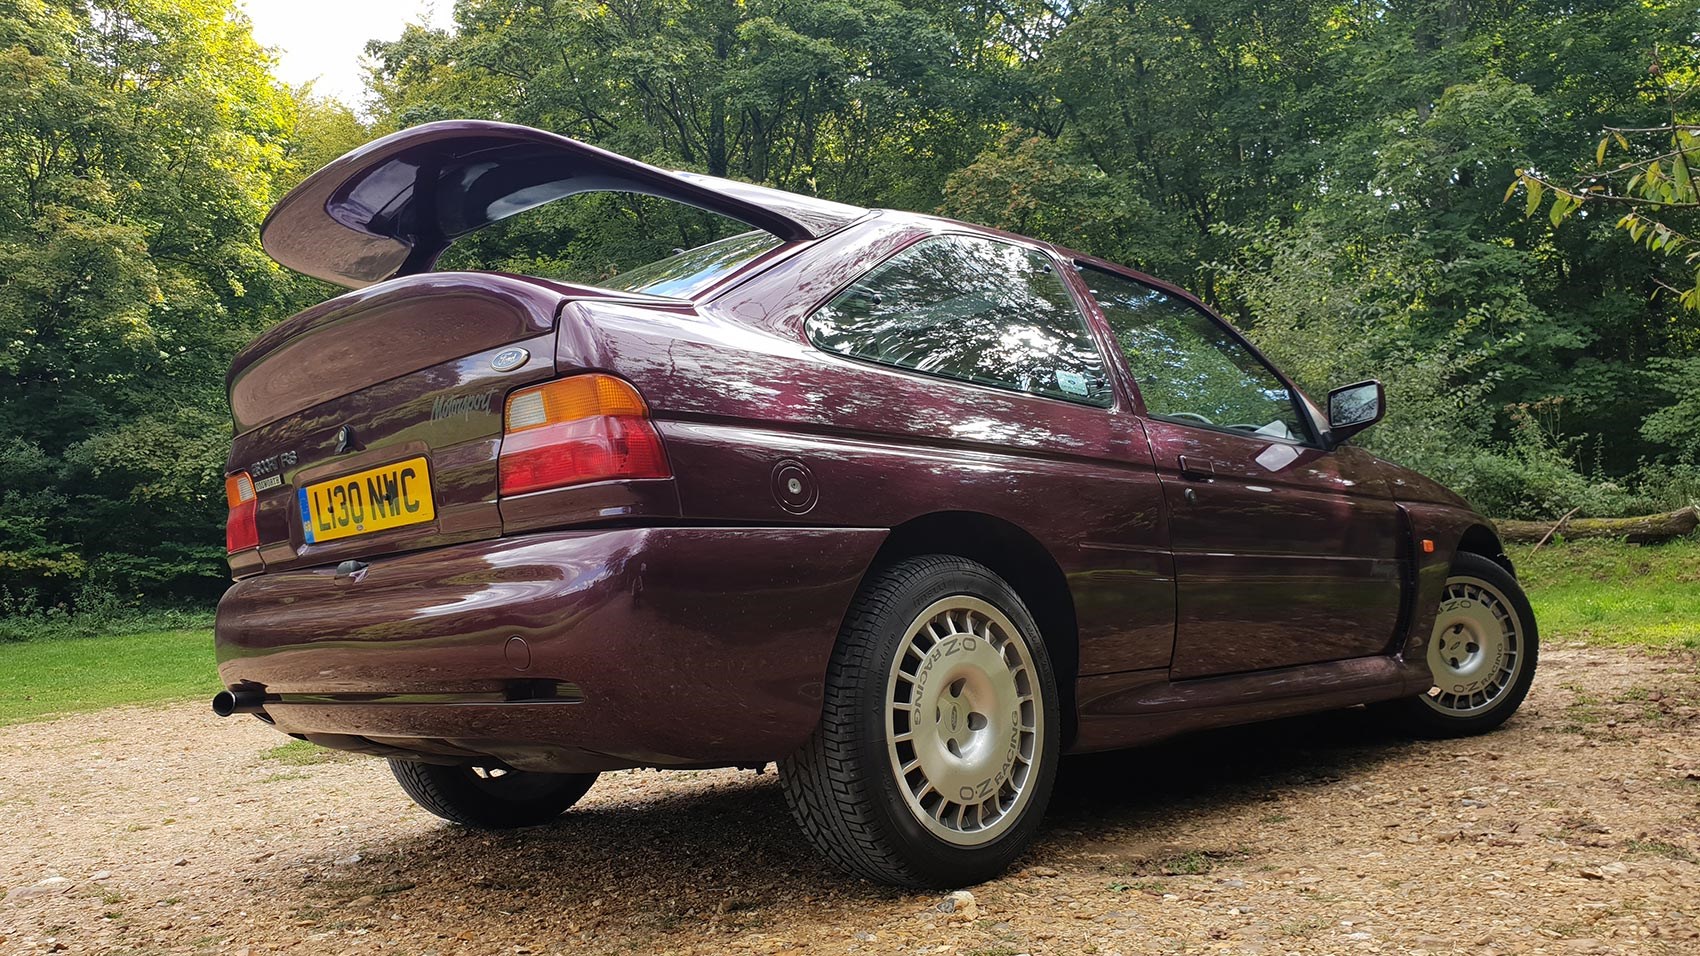 Ford Escort Cosworth Monte Carlo road test, specs and prices: now worth around £70,000